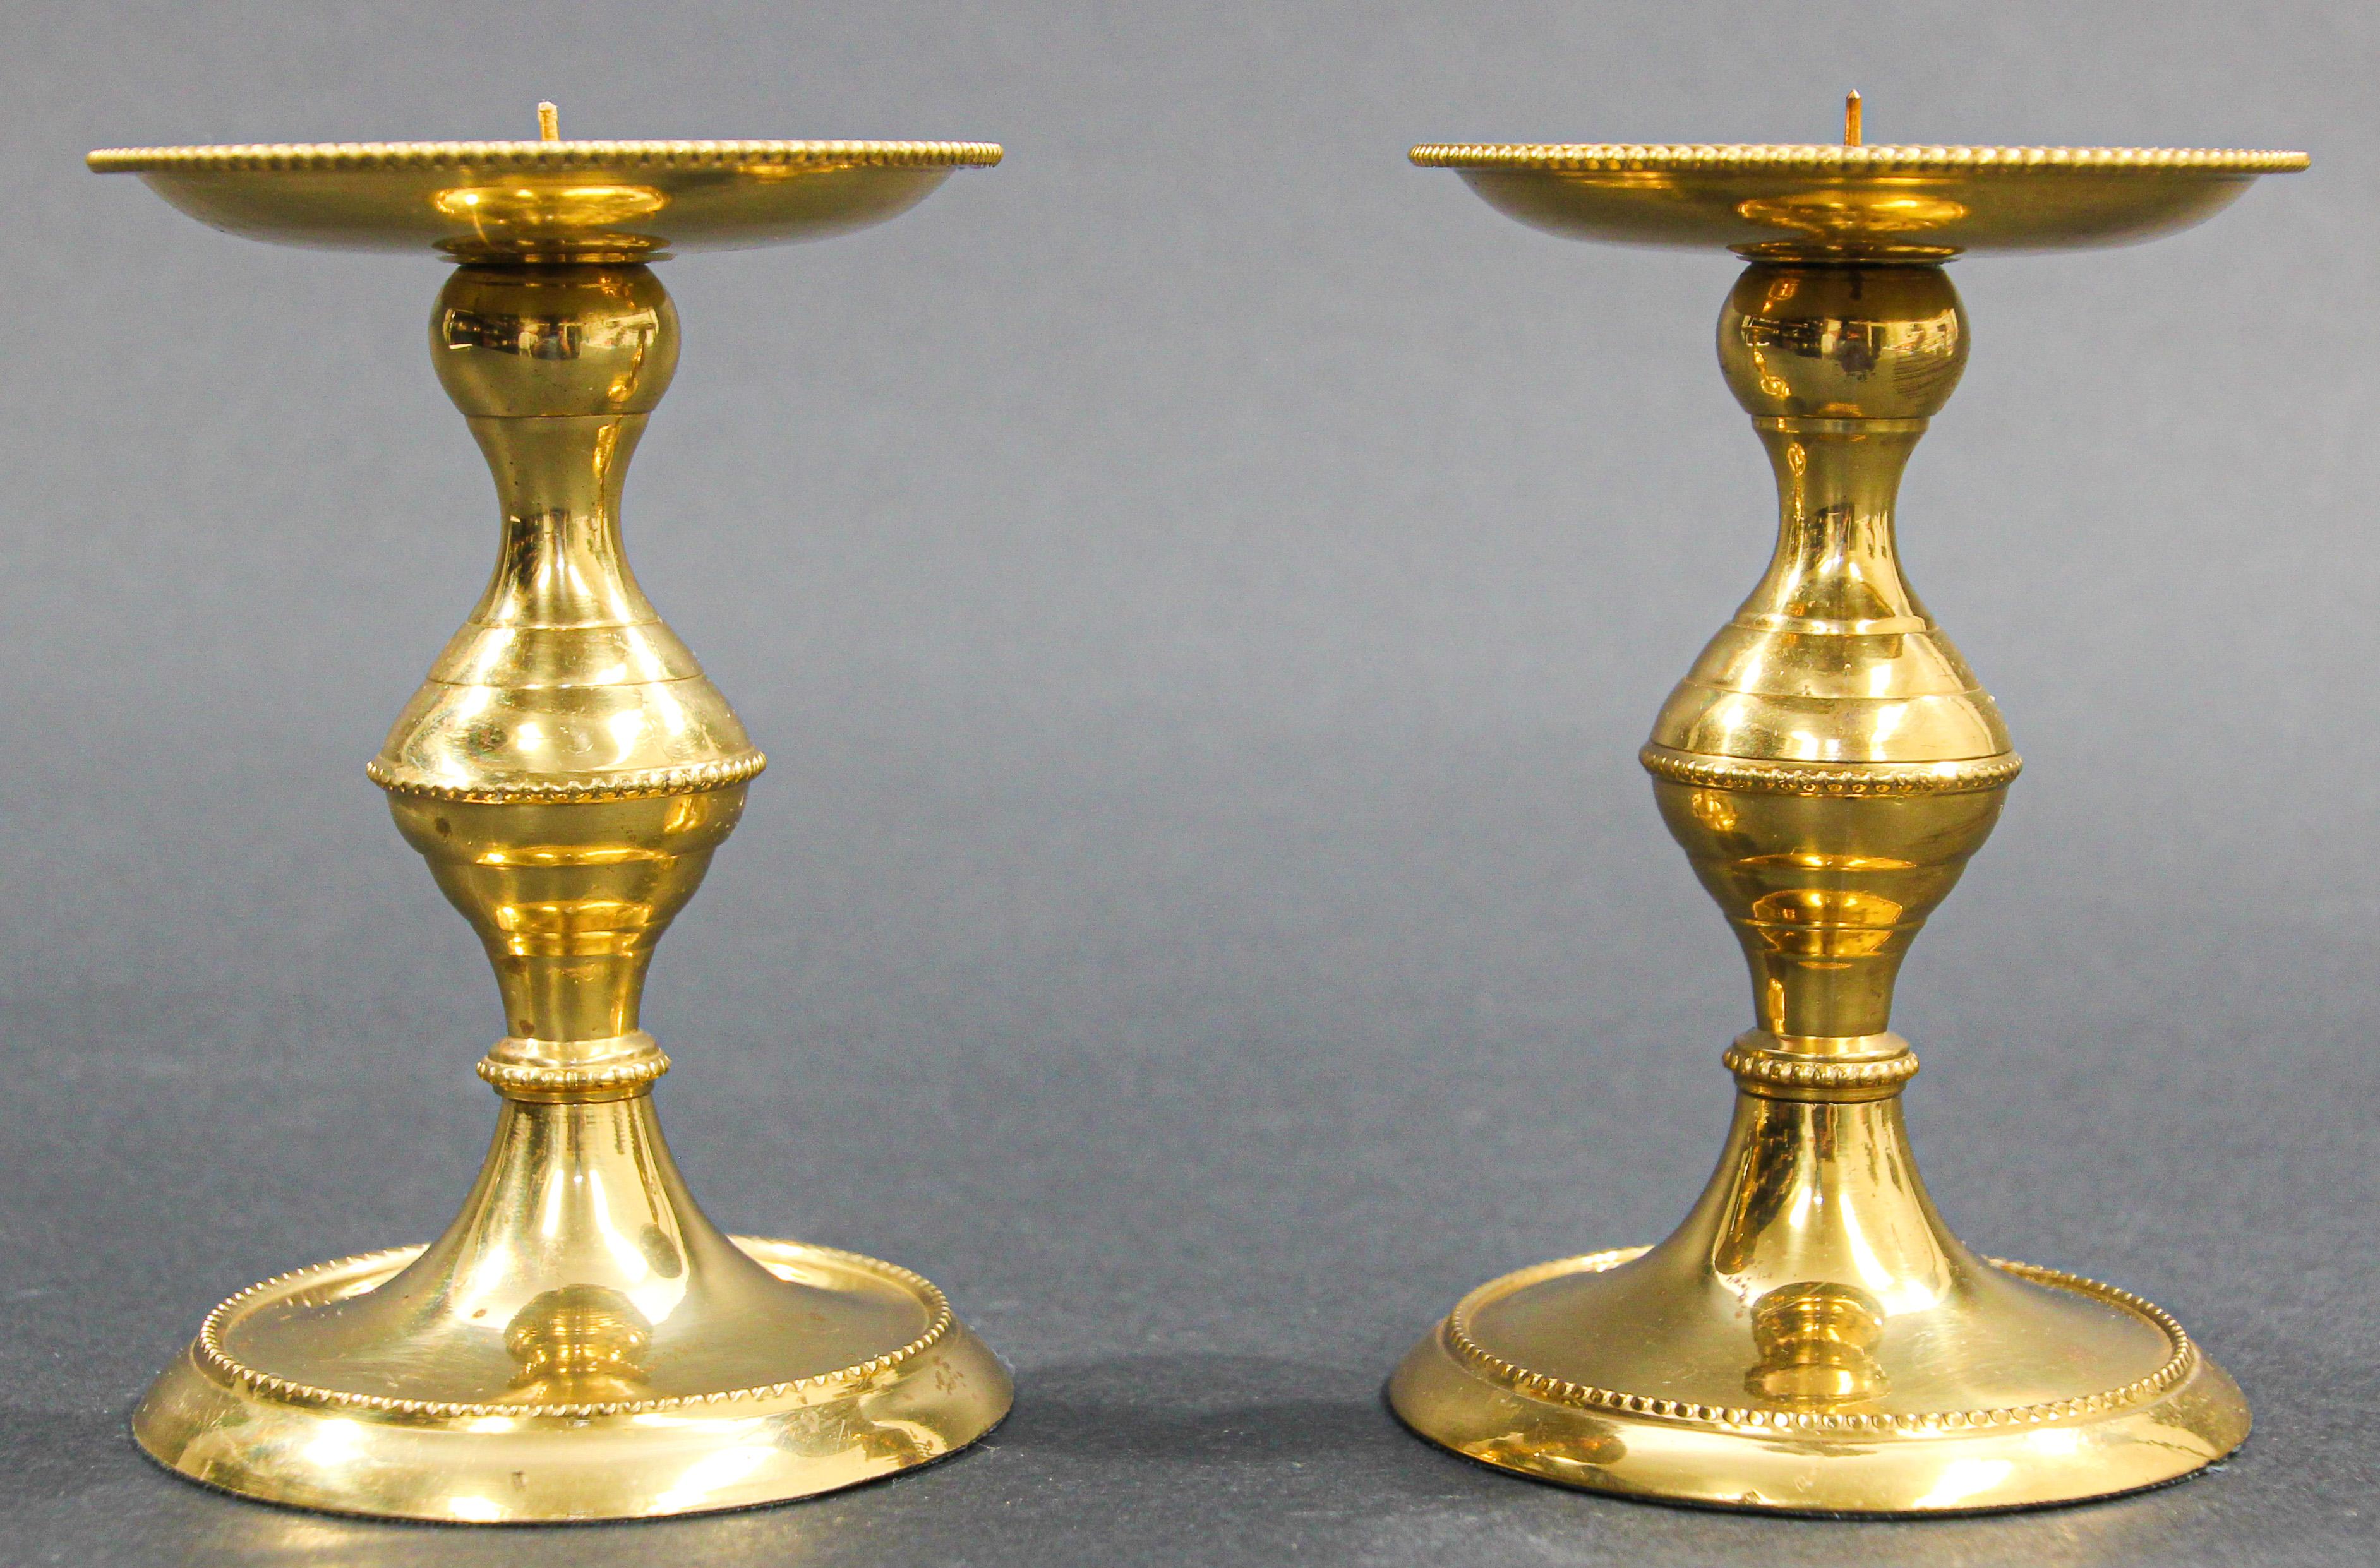 Pair of brass polished candlesticks with a molded hexagonal base.
Hand-tooled contemporary brass candlesticks with round base.
Handcrafted cast brass candle sticks, candleholder with modern clean design.
Measures: 
Height 6